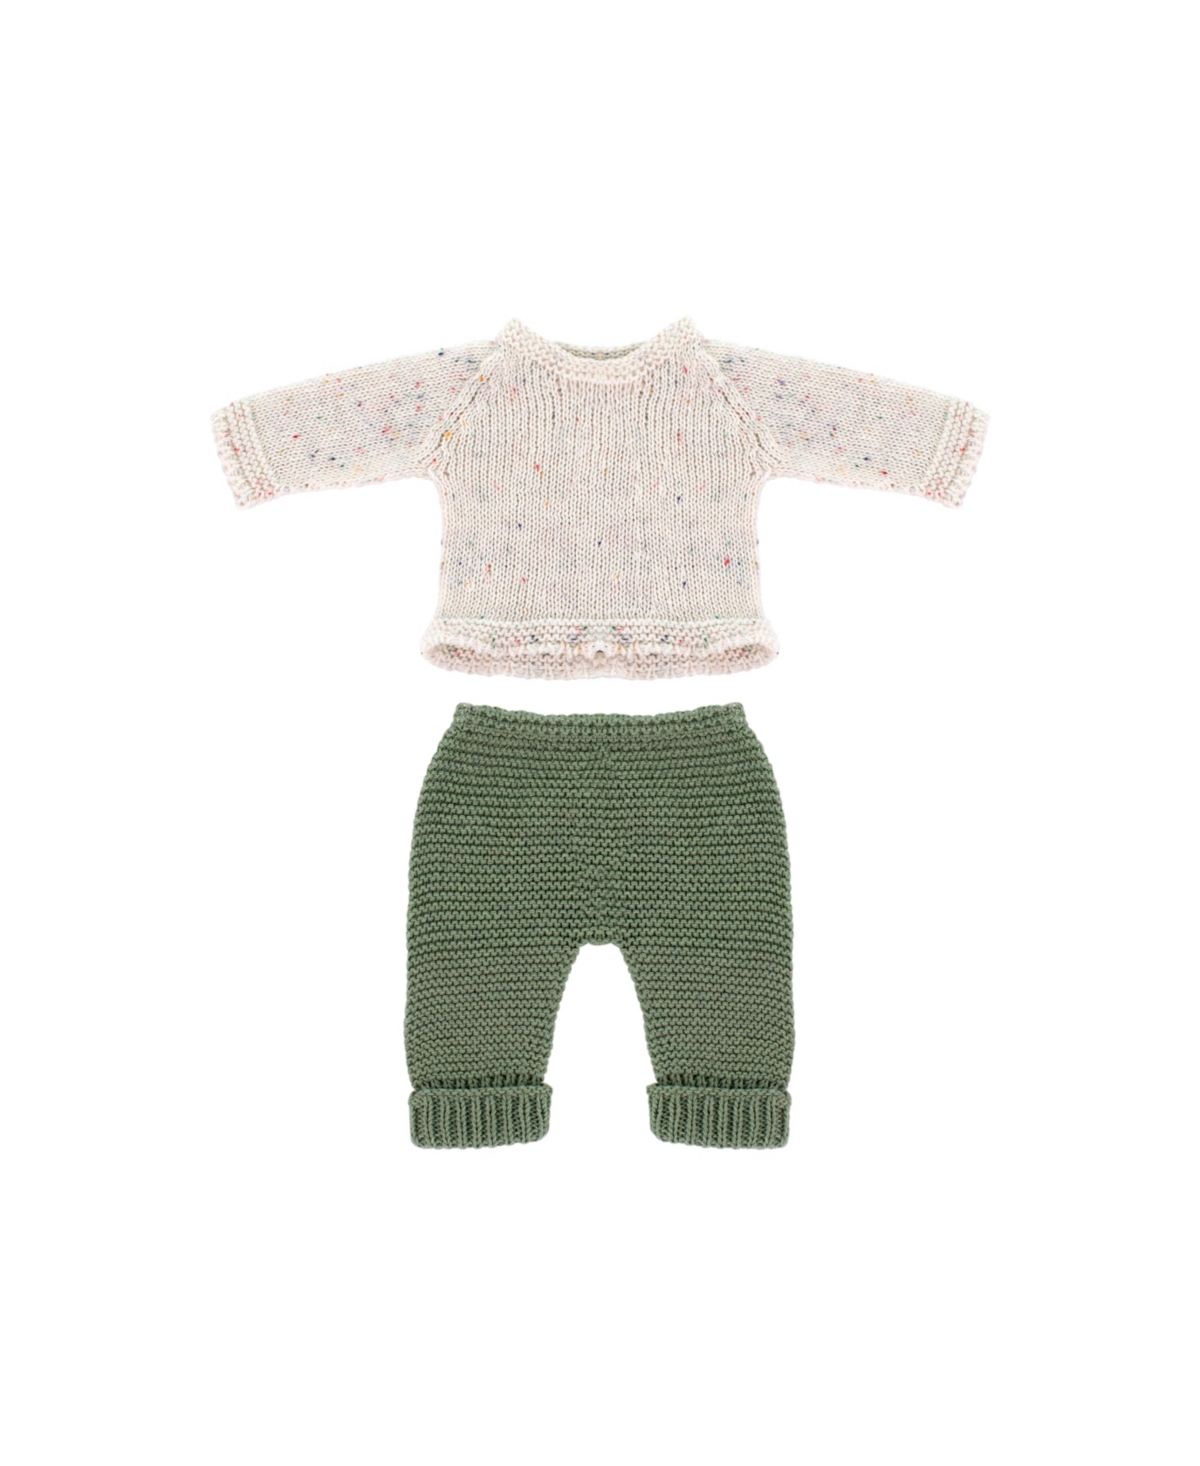 Miniland Kids' Knitted Doll Outfit 12.62" In Green And White